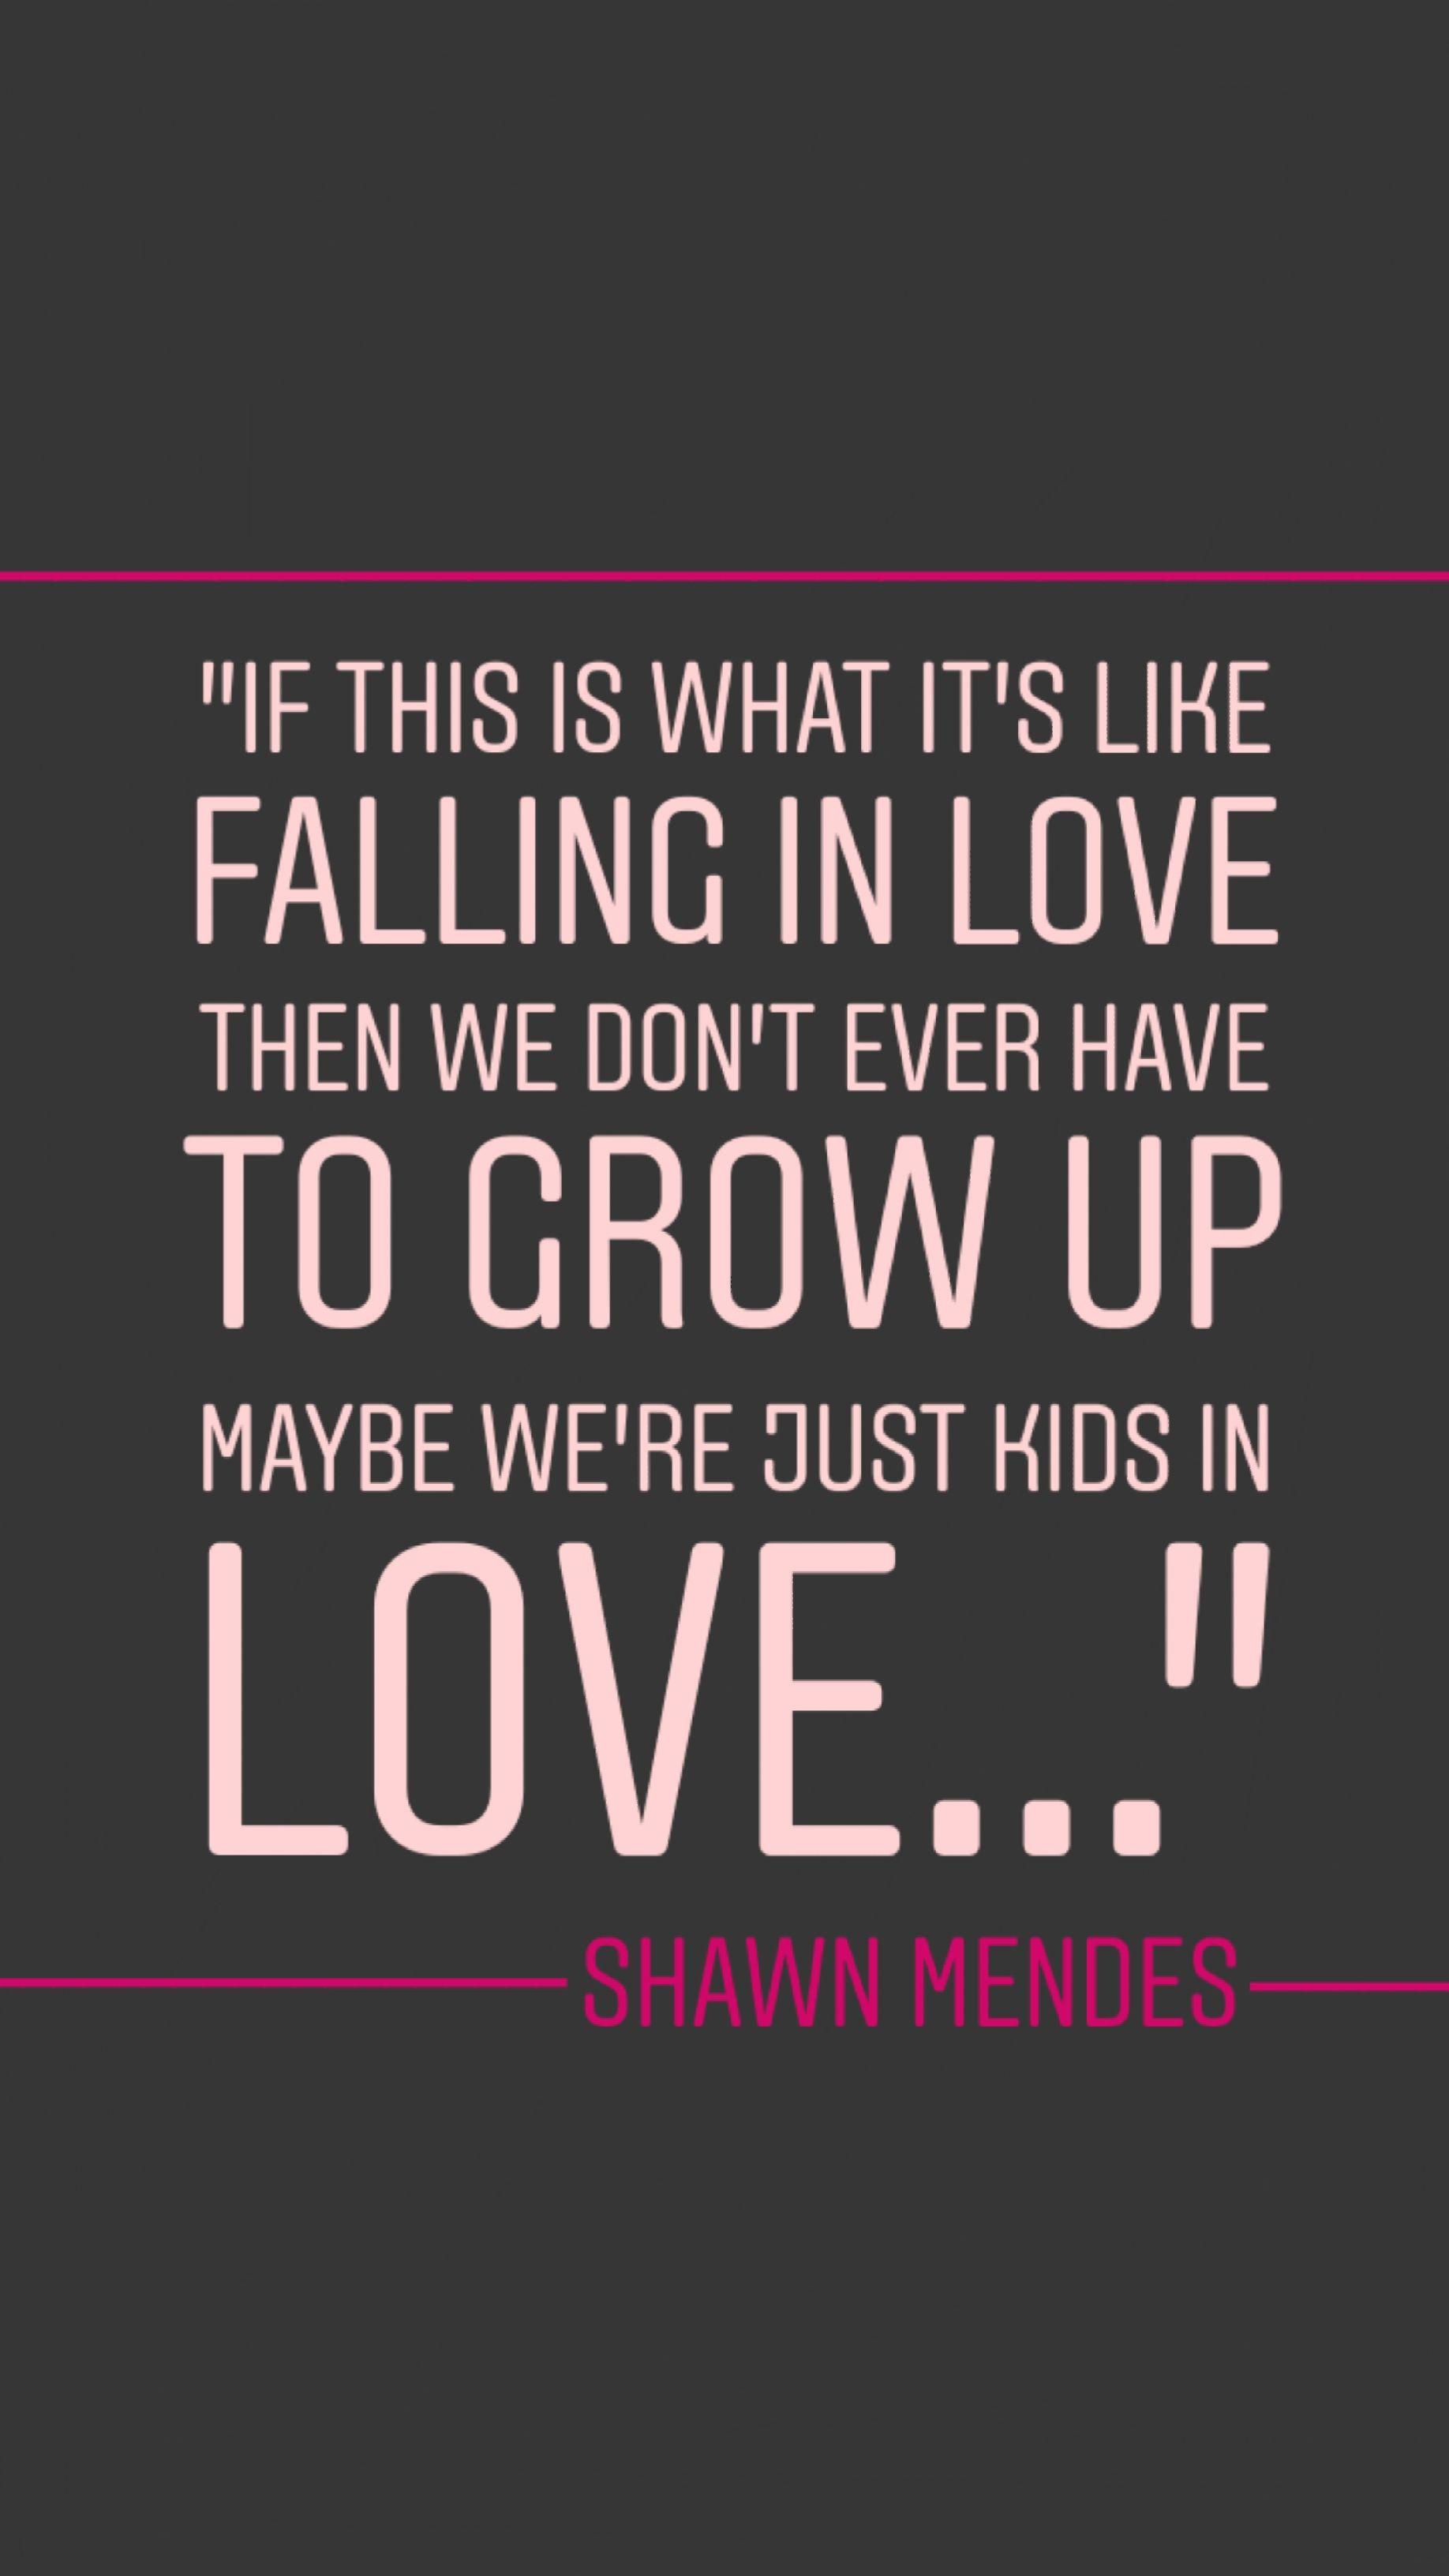 ShawnMendes #quotes #love #wallpaper #music #KidInLove. Shawn